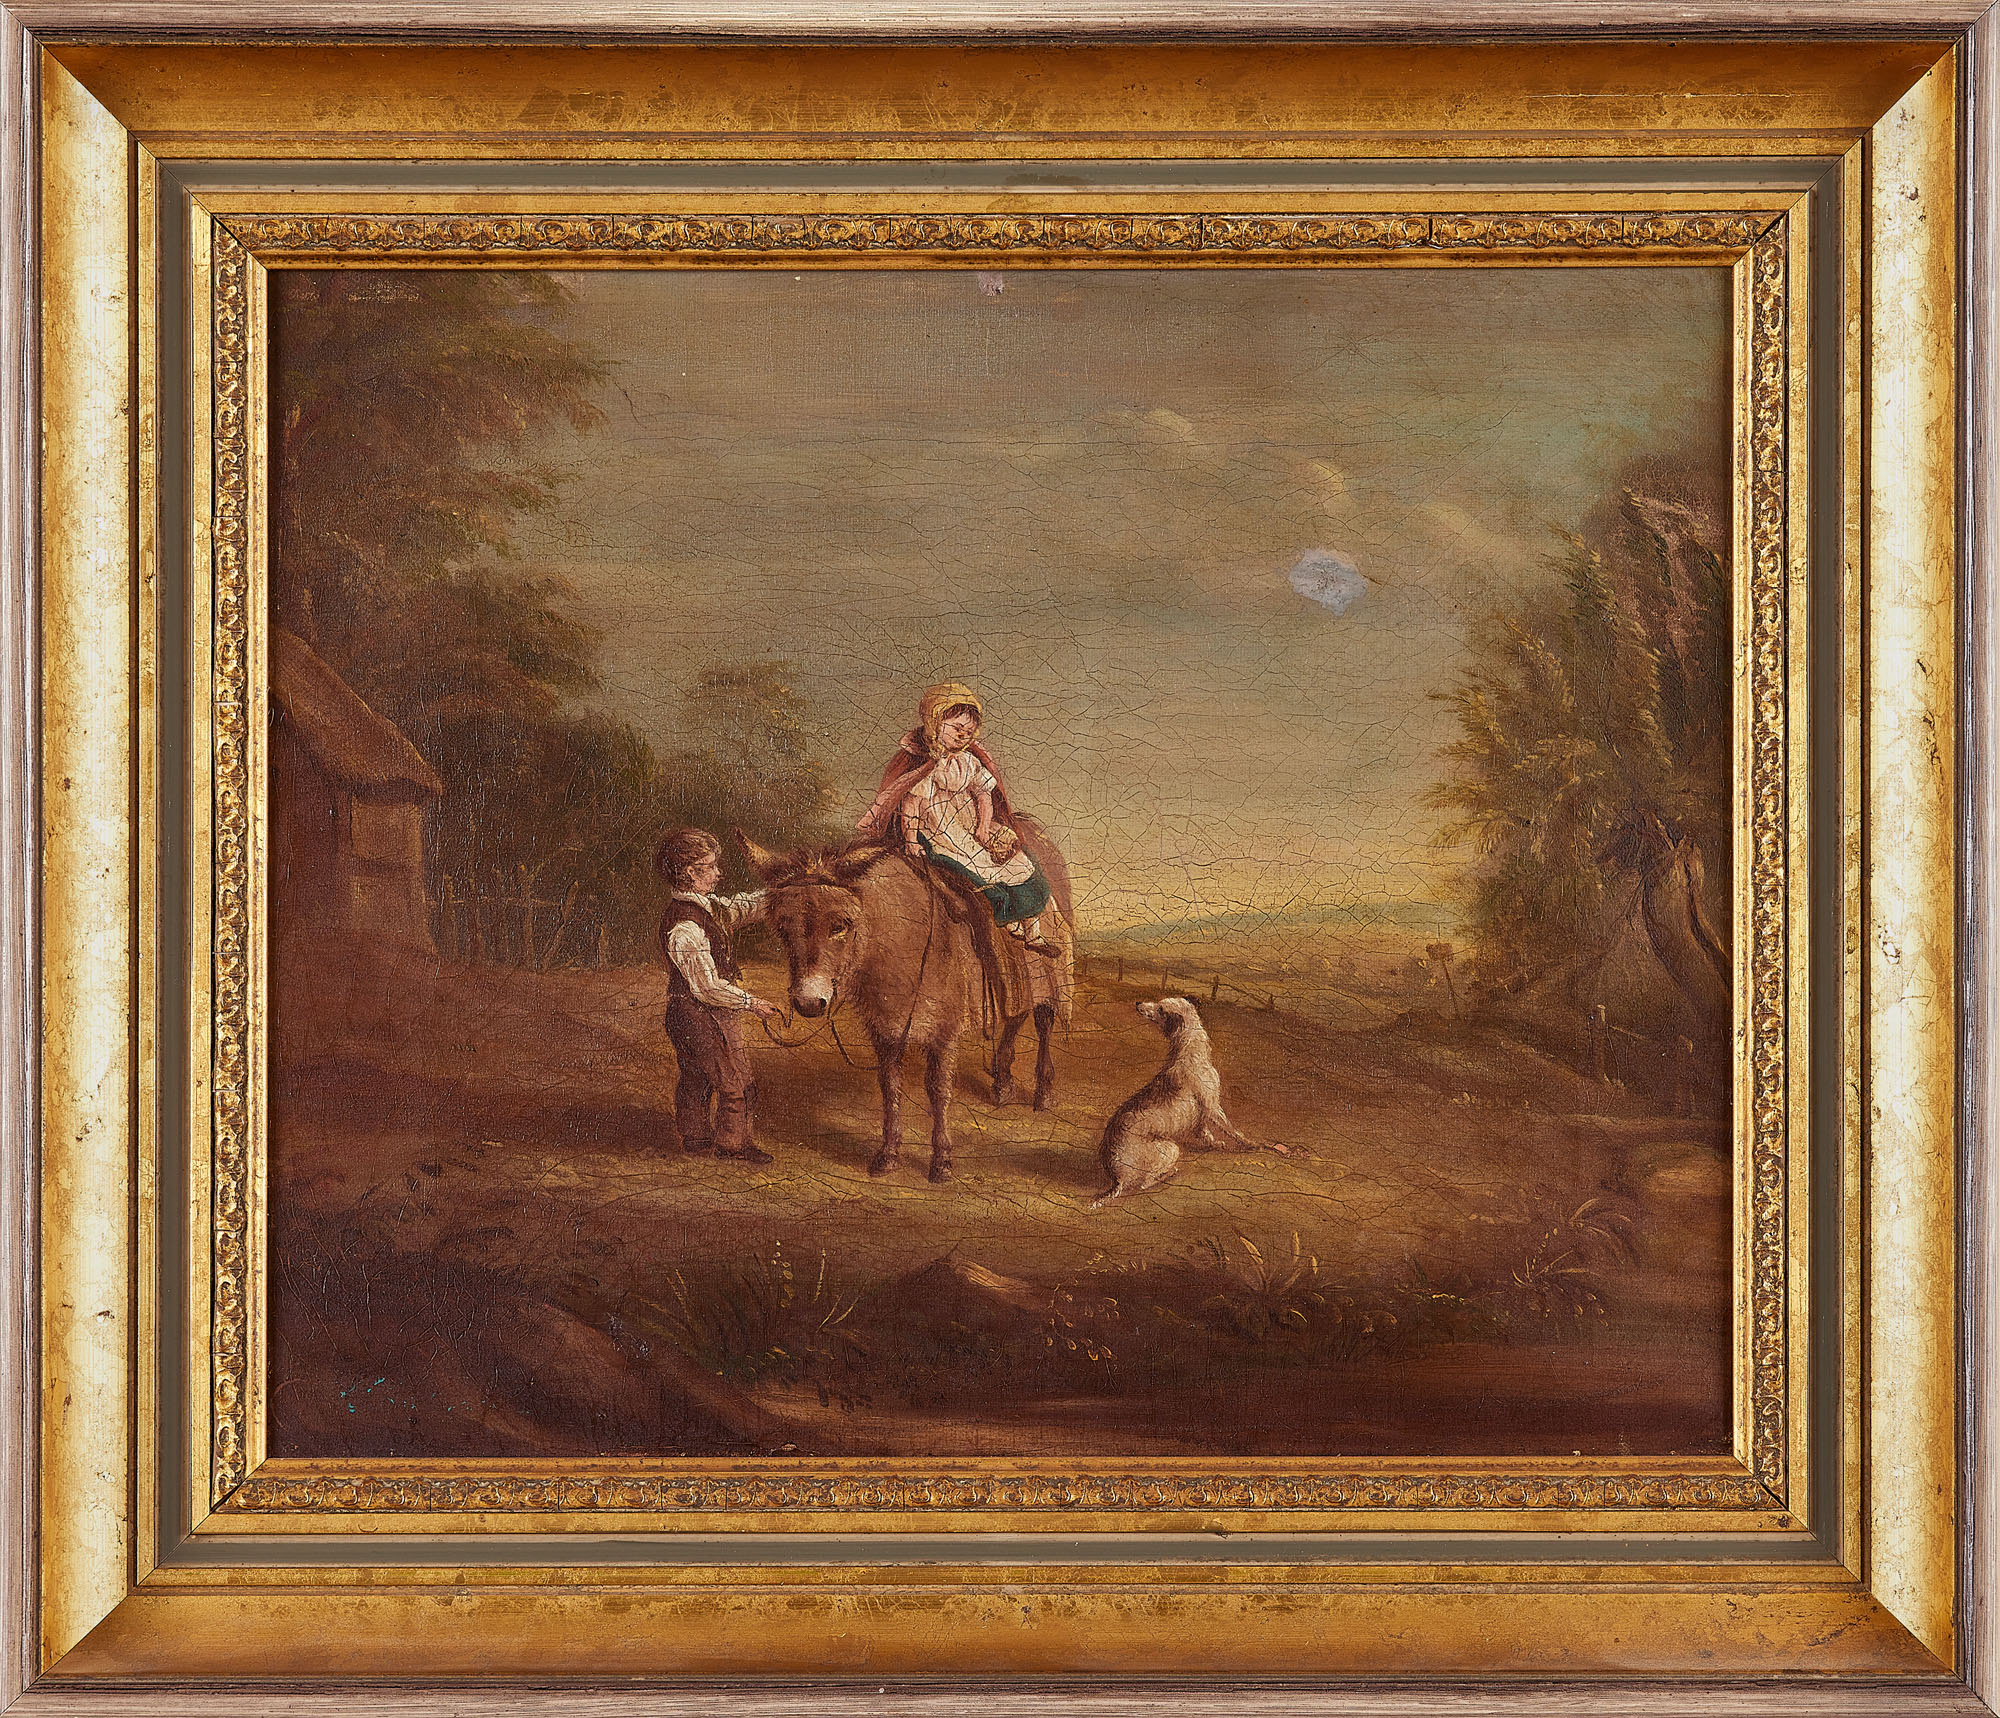 19th century Continental School, Figures with a donkey